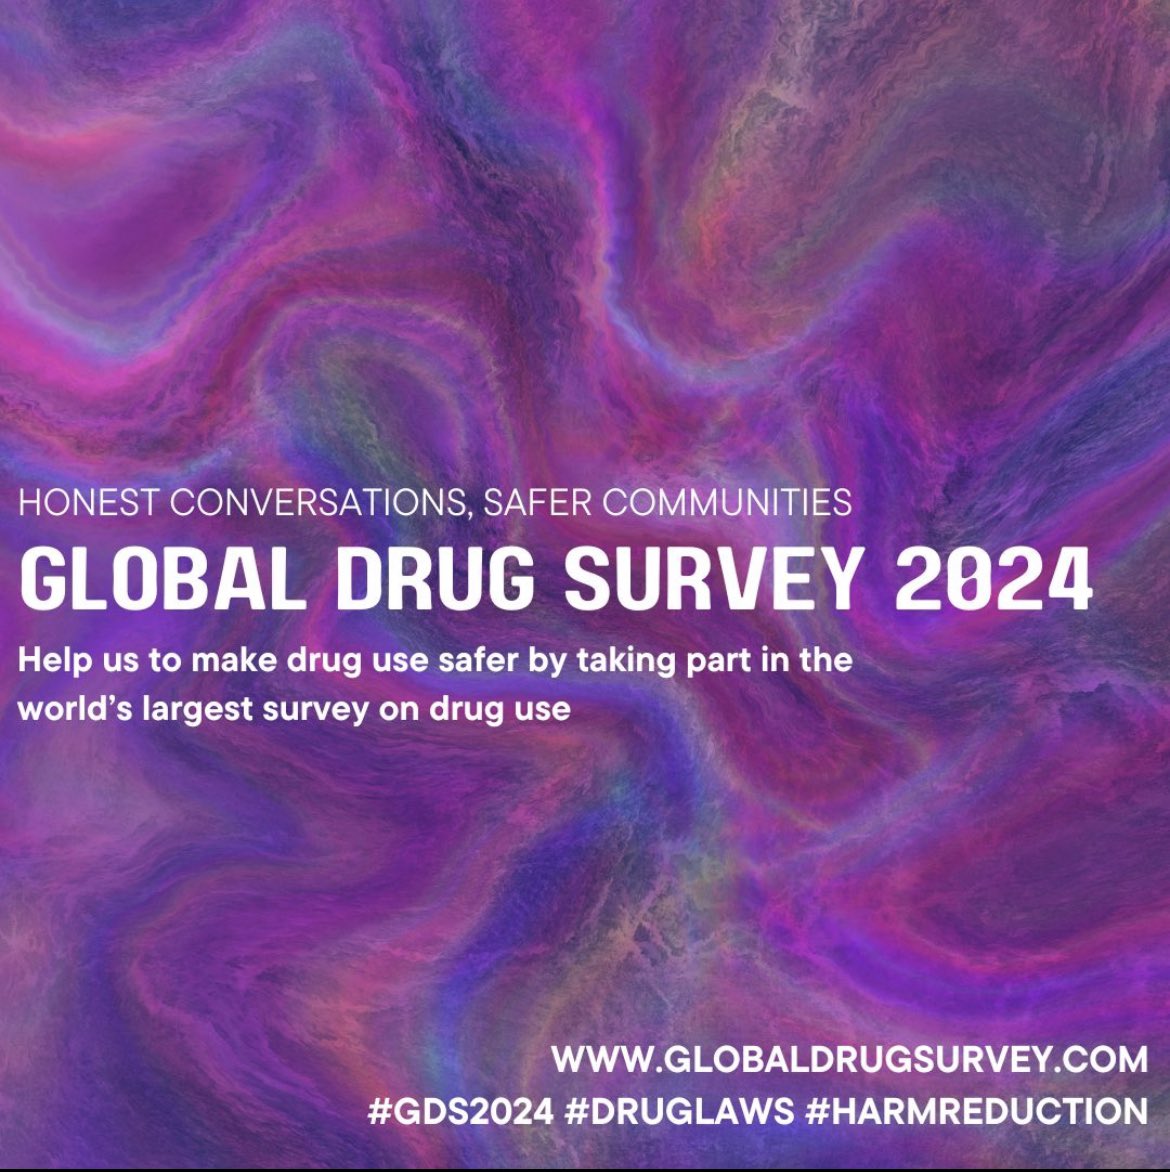 The Global Drug Survey is closing on April 30th. Ensure your experiences with drug use are included. Share your insights and contribute to a safer more informed world globaldrugsurvey.com